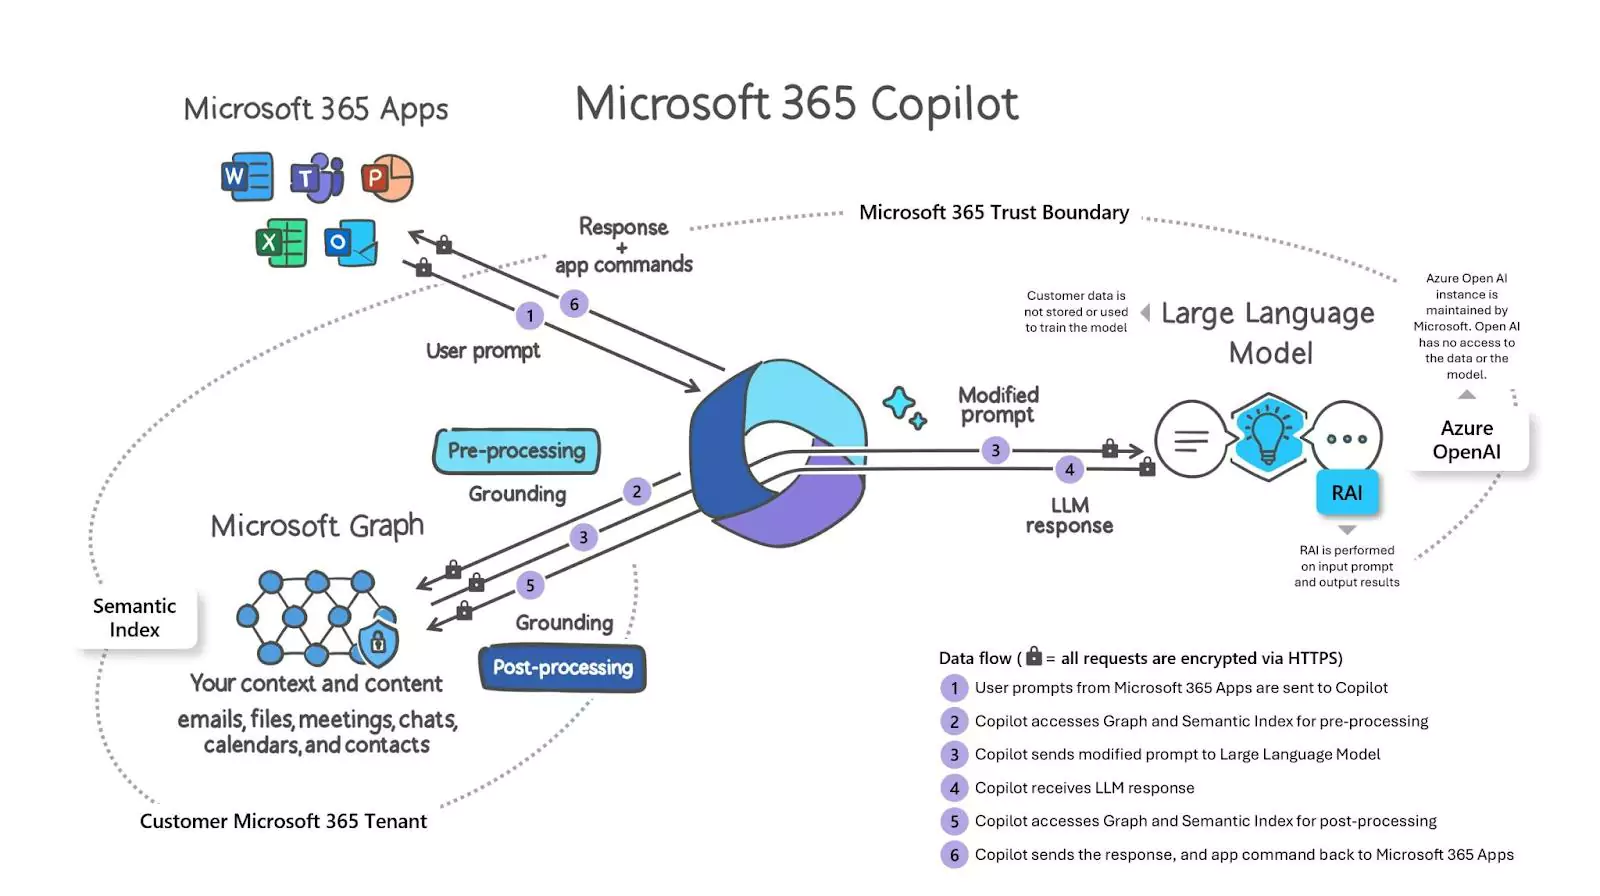 Microsoft 365 Apps and Microsoft 365 Copilot and Working Architecture